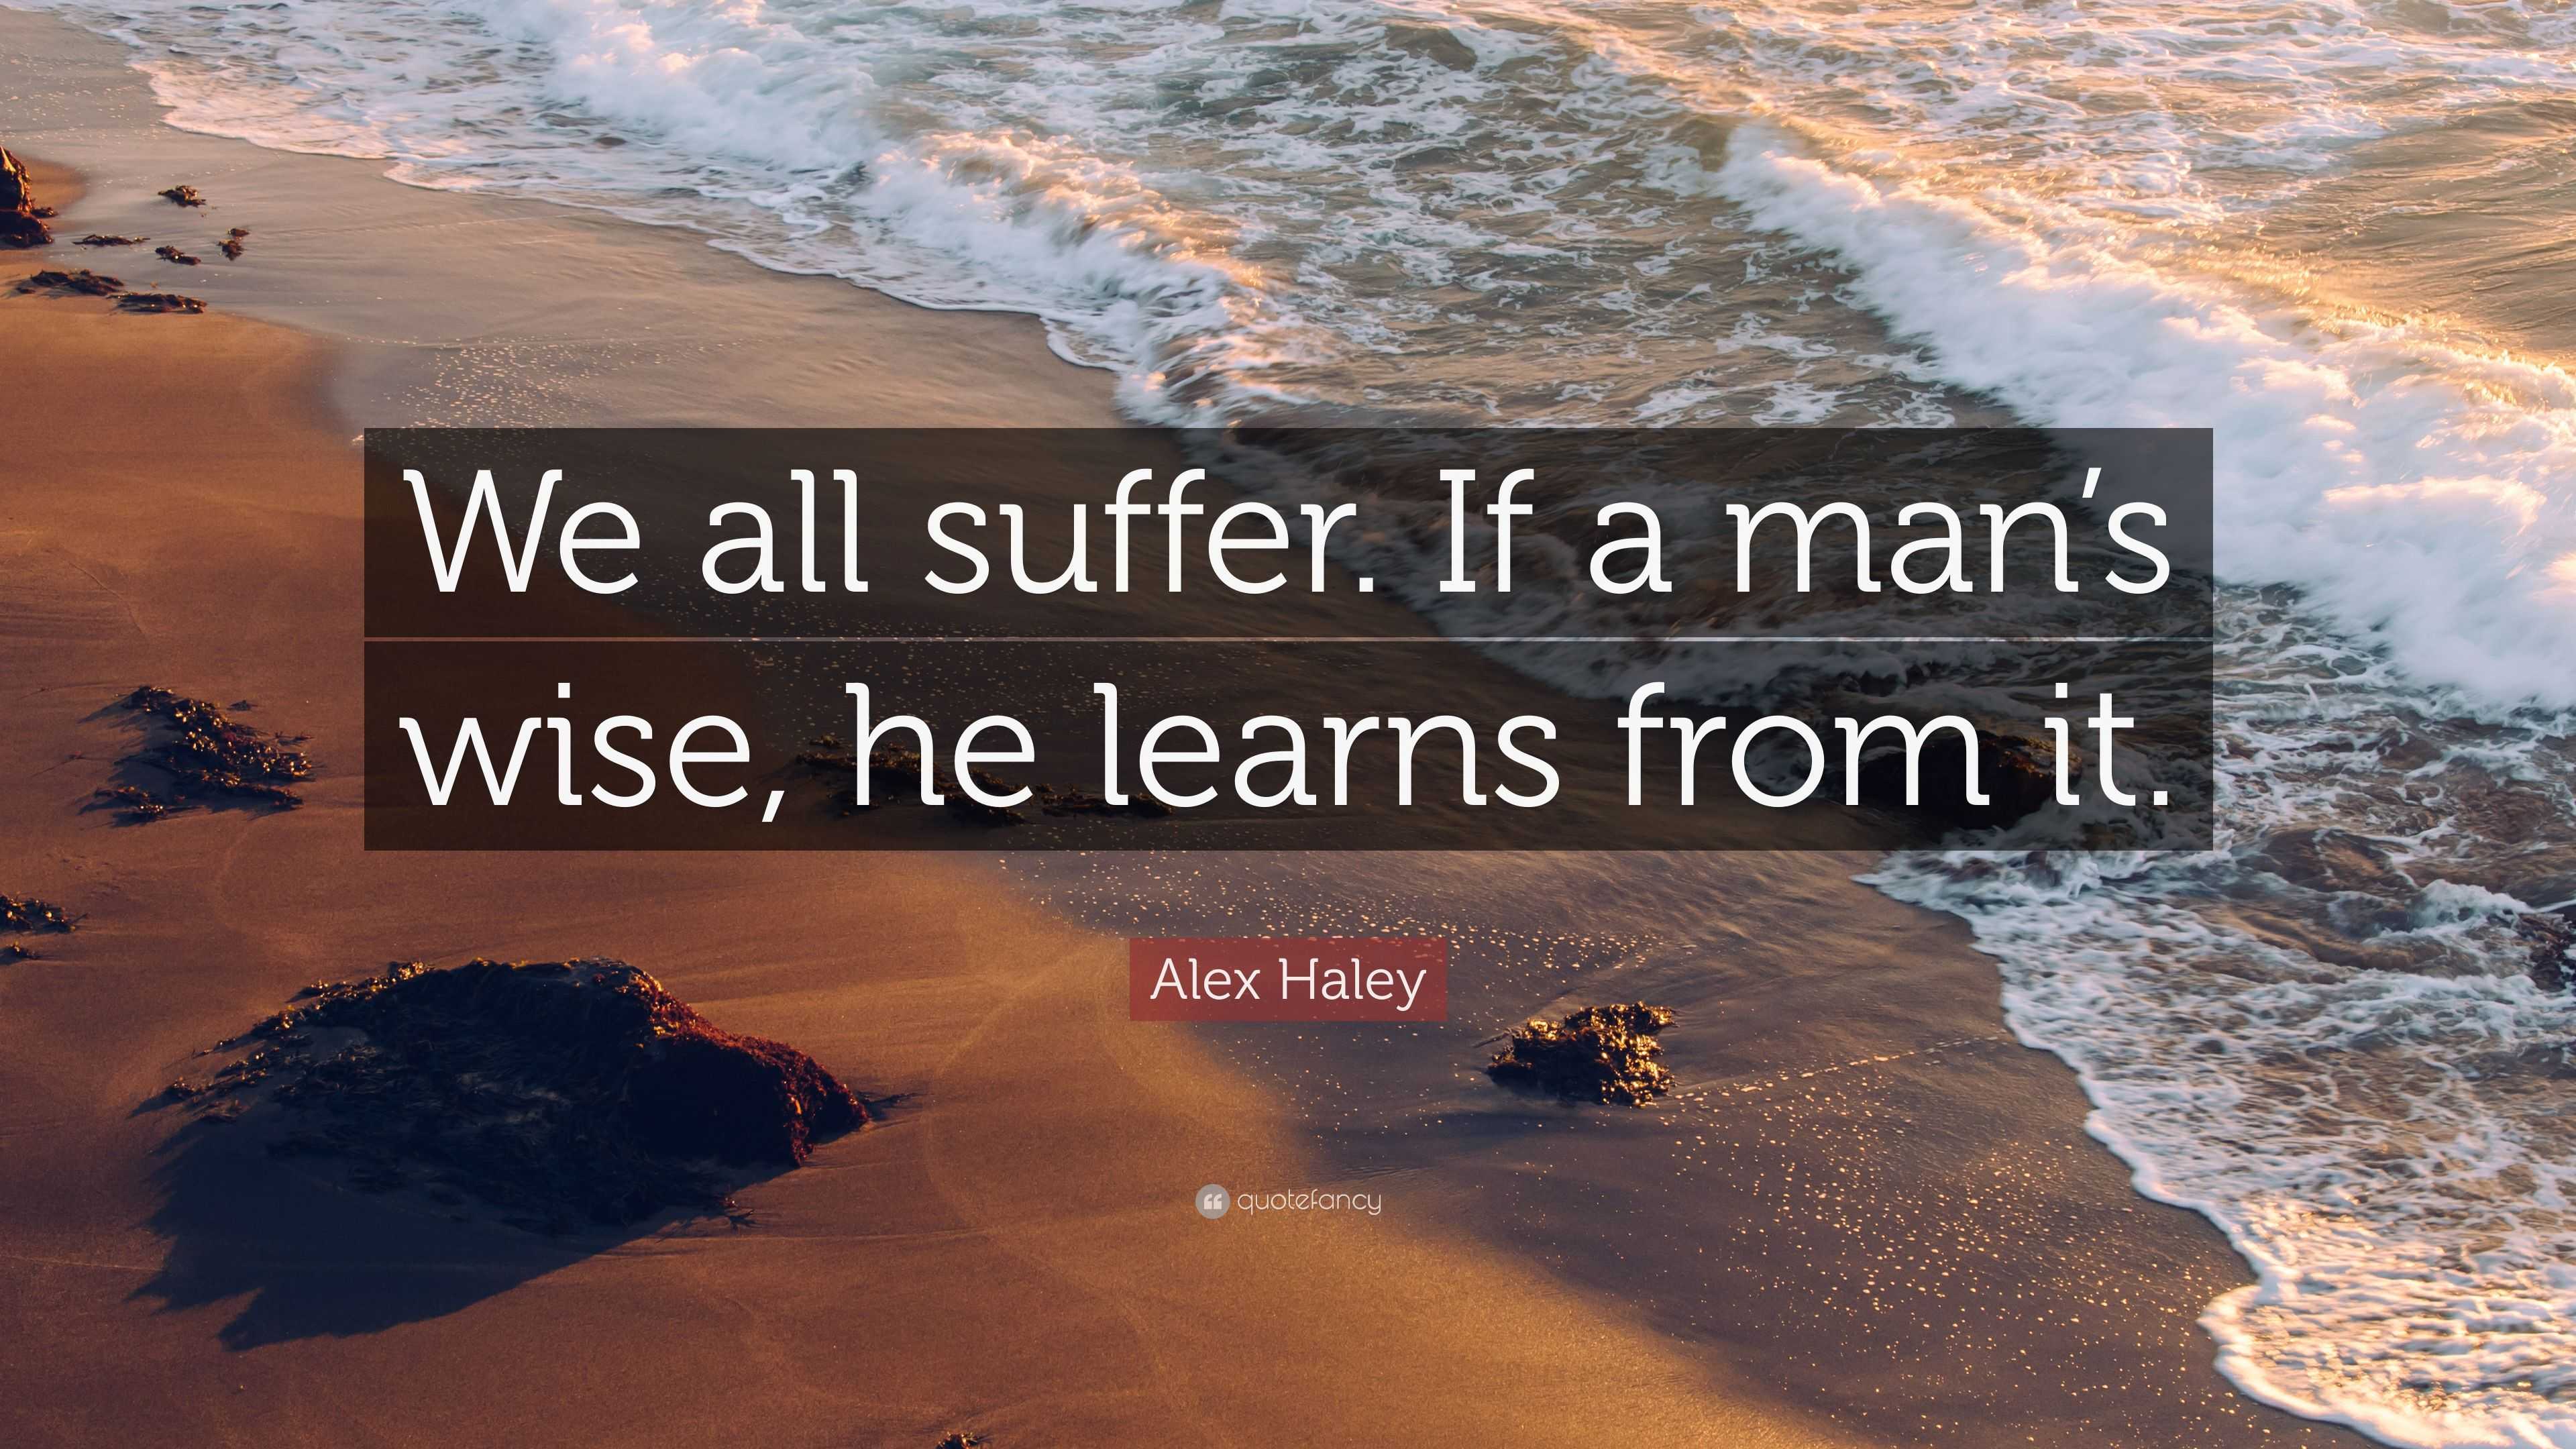 Alex Haley Quote: “We all suffer. If a man’s wise, he learns from it.”